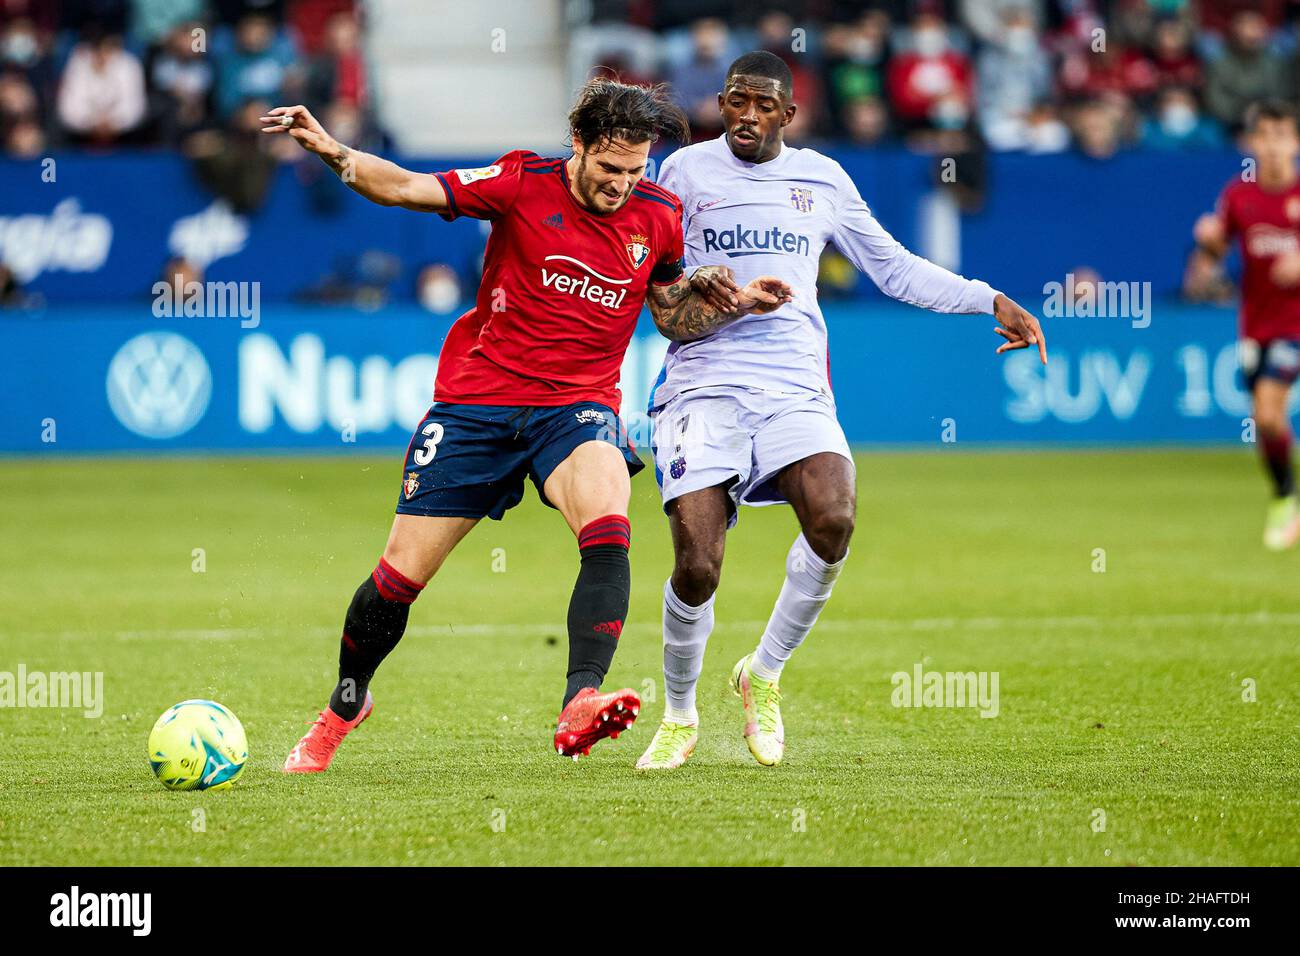 Pamplona, Spain. 12th Dec, 2021. Juan Cruz (L), defender of CA Osasuna, and Ousmane Dembelé (R), forward of FC Barcelona are seen in action during the Spanish football of La Liga Santander, the match between CA Osasuna and FC Barcelona at the Sadar stadium in Pamplona.(Final score; CA Osasuna 2:2 FC Barcelona) Credit: SOPA Images Limited/Alamy Live News Stock Photo